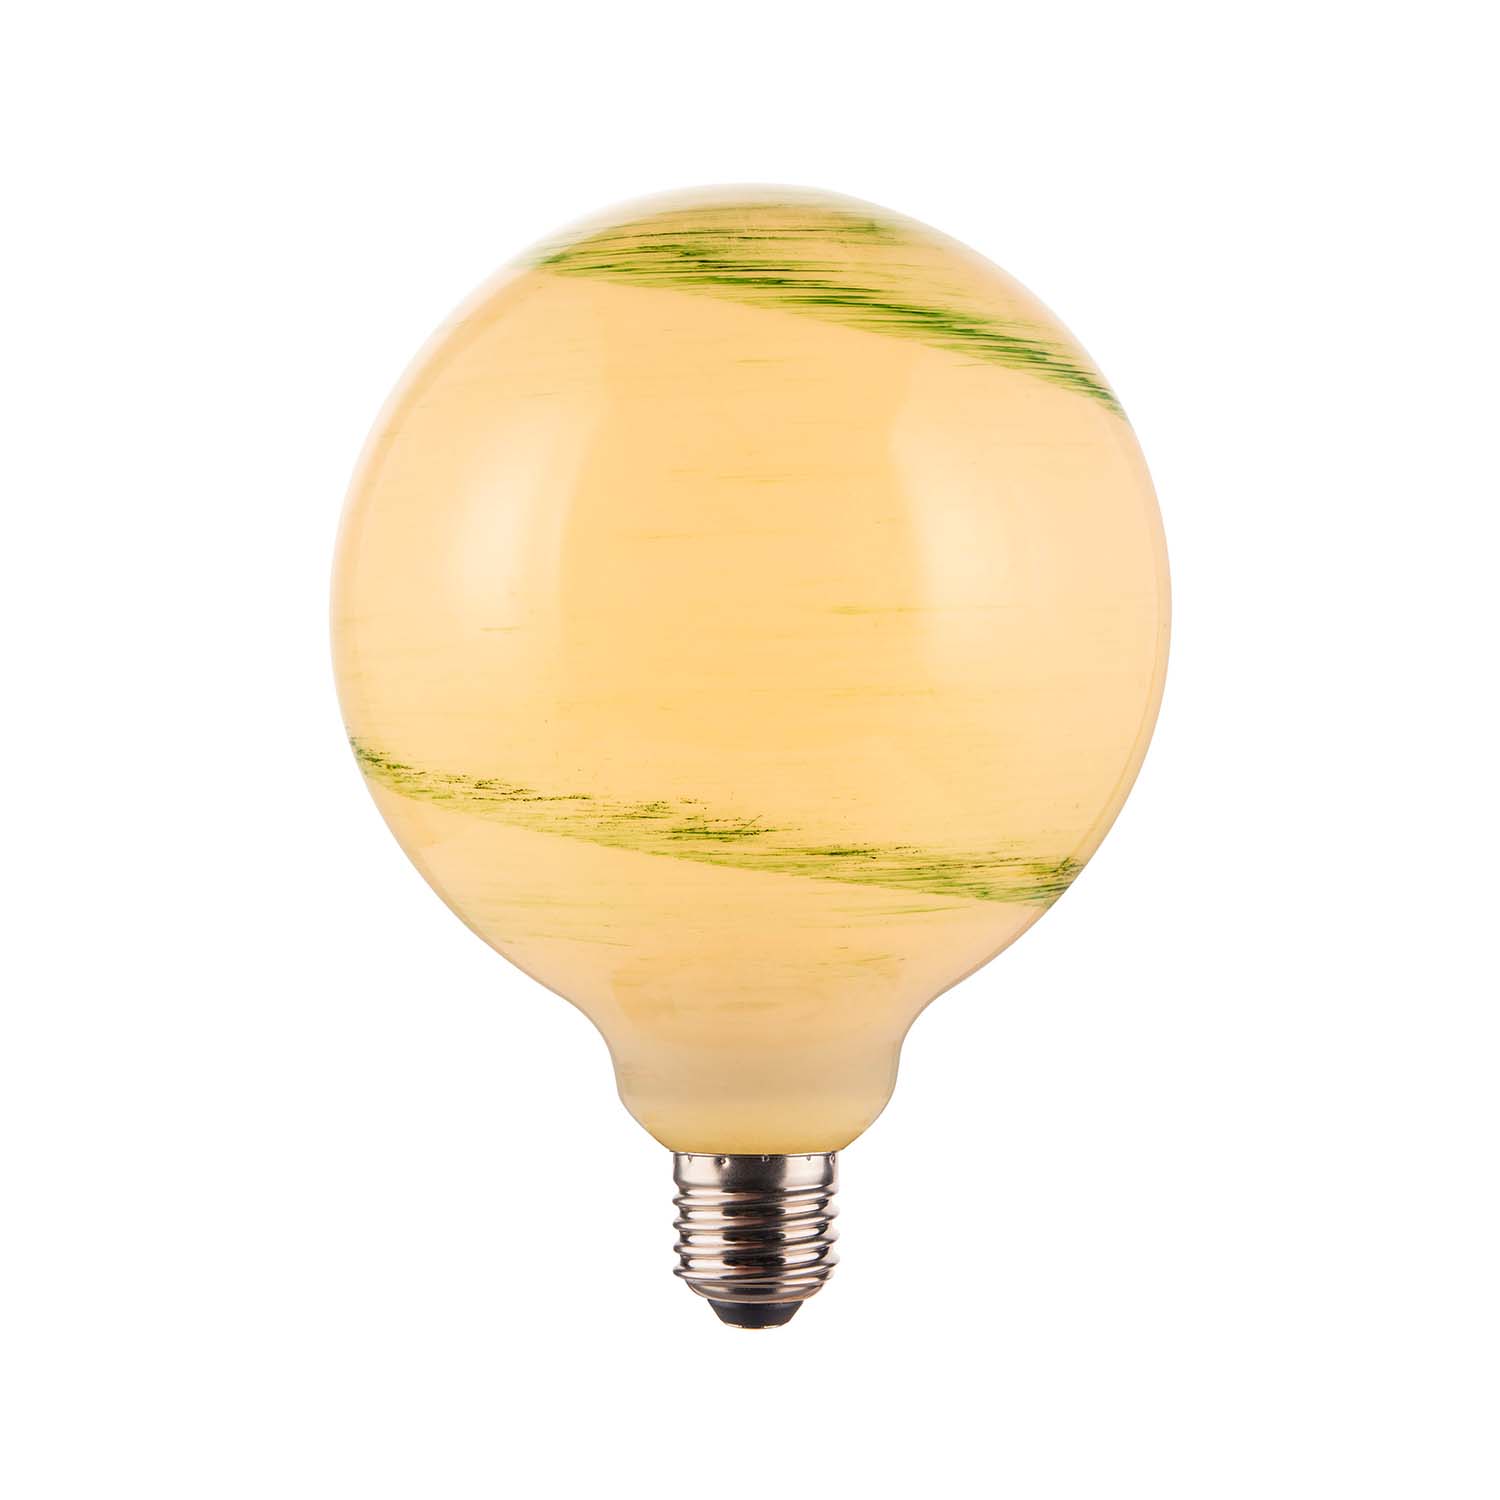 Stockholm - E27 LED bulb with marble effect design